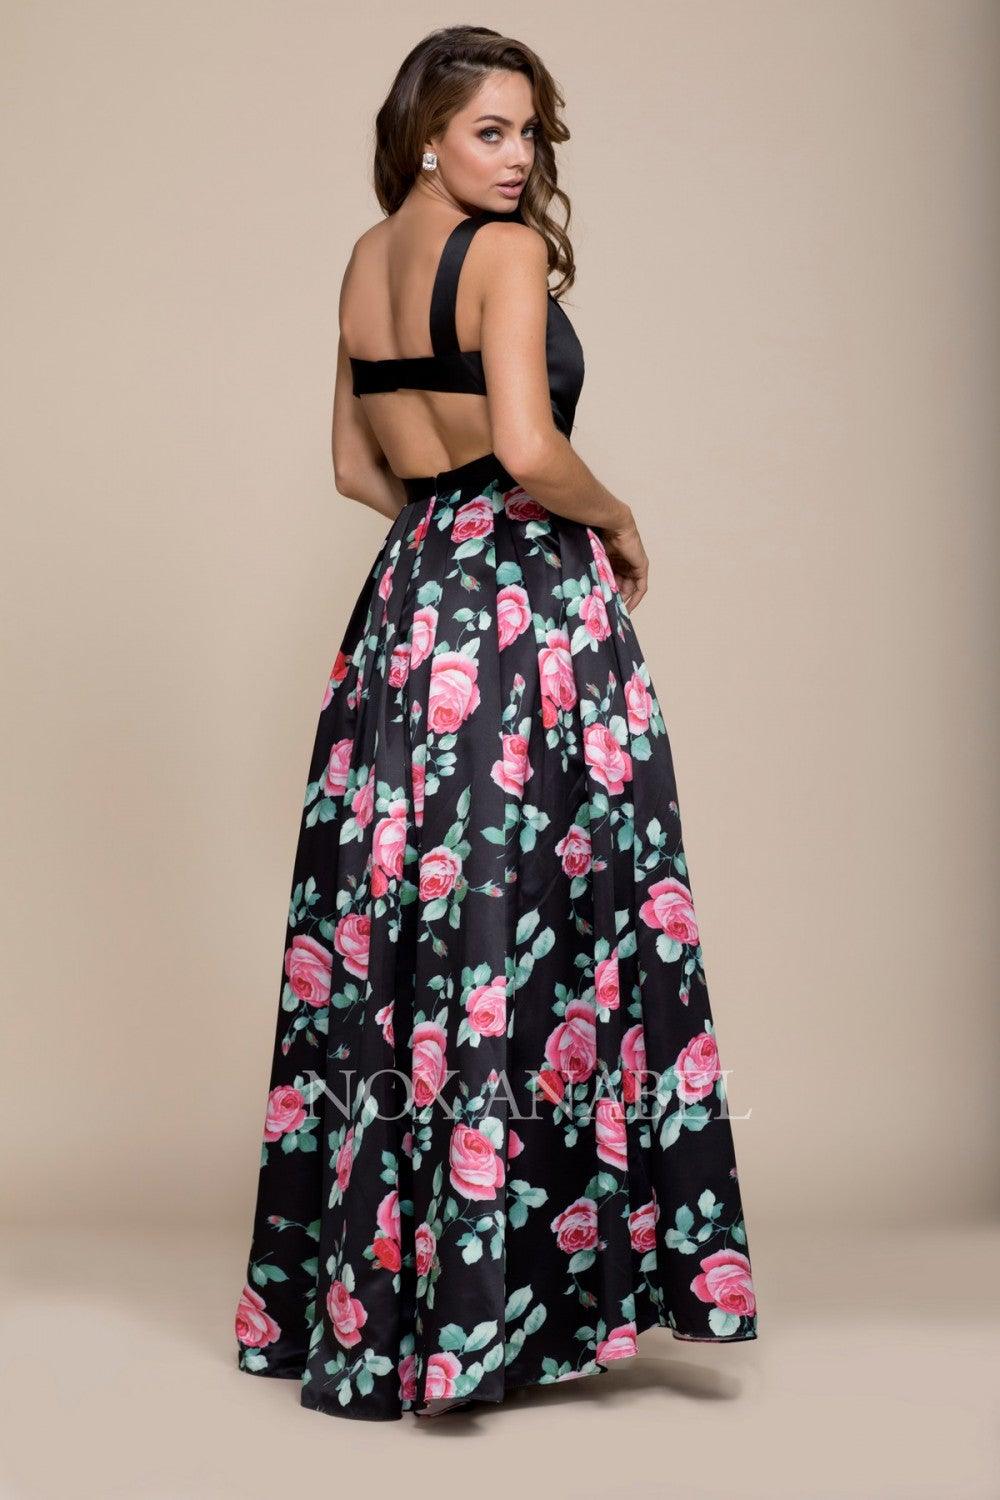 Long Floral Print Skirt Prom Dress Evening Gown - The Dress Outlet Nox Anabel